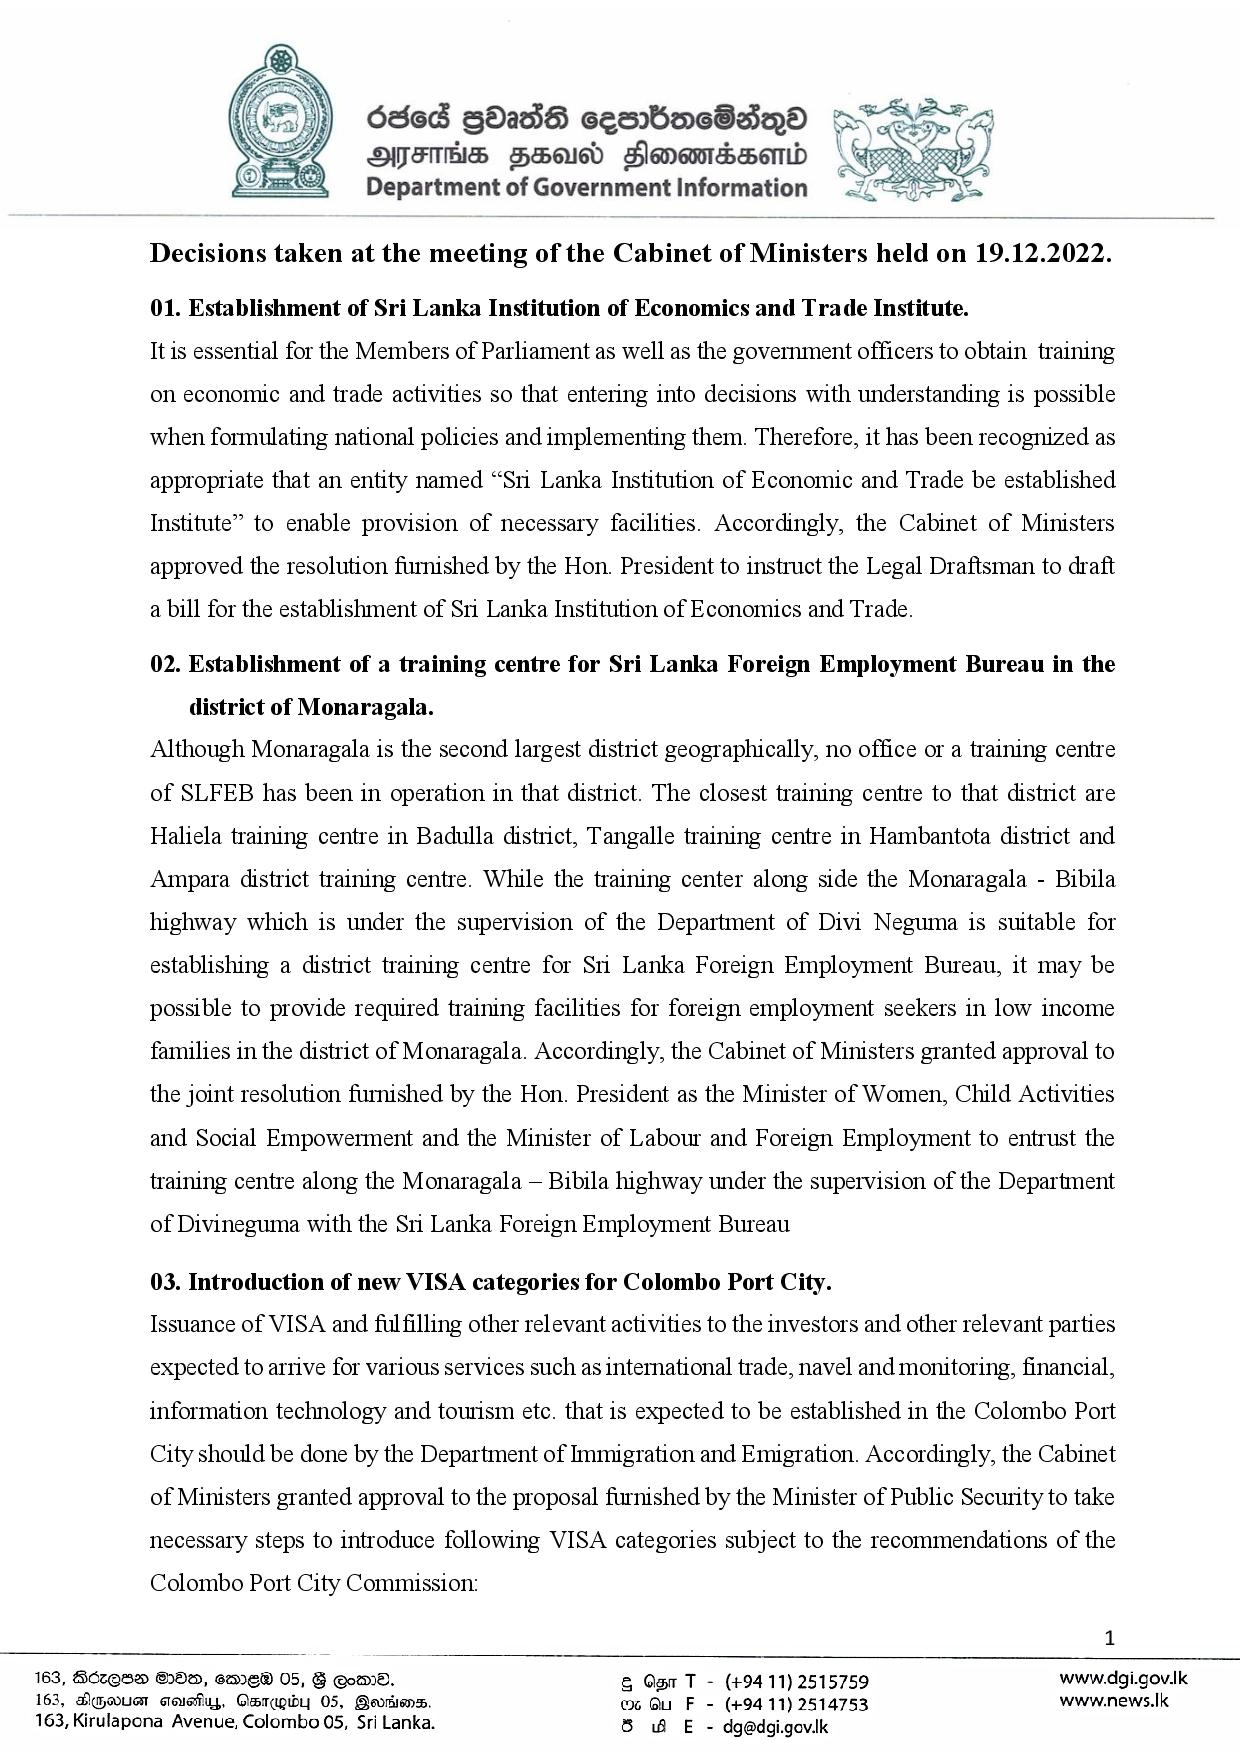 Cabinet Decisions on 19.12.2022 English page 001